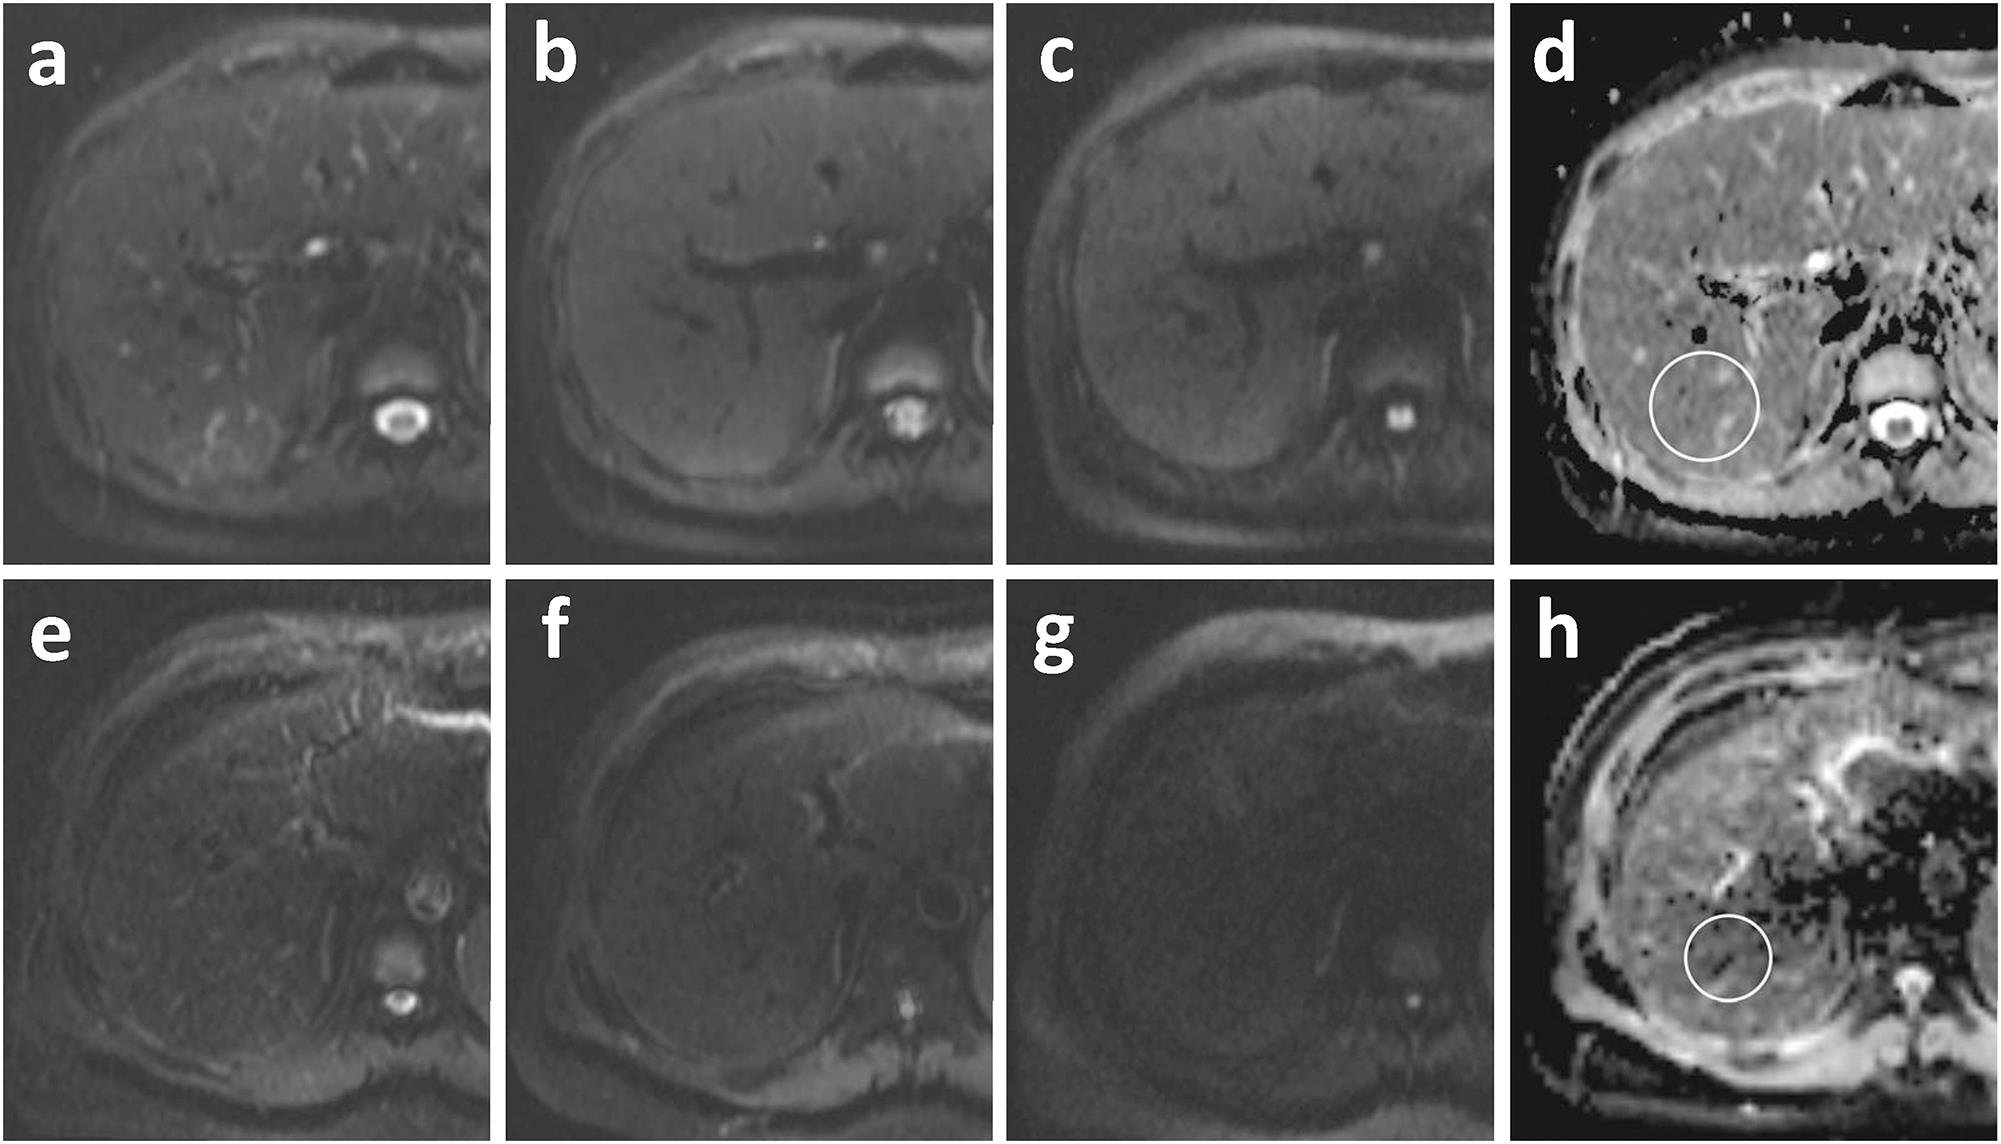 Diffusion-weighted MR imaging in a 29-year-old female with normal liver (a-d) and a 44-year old male with liver cirrhosis (e-h).